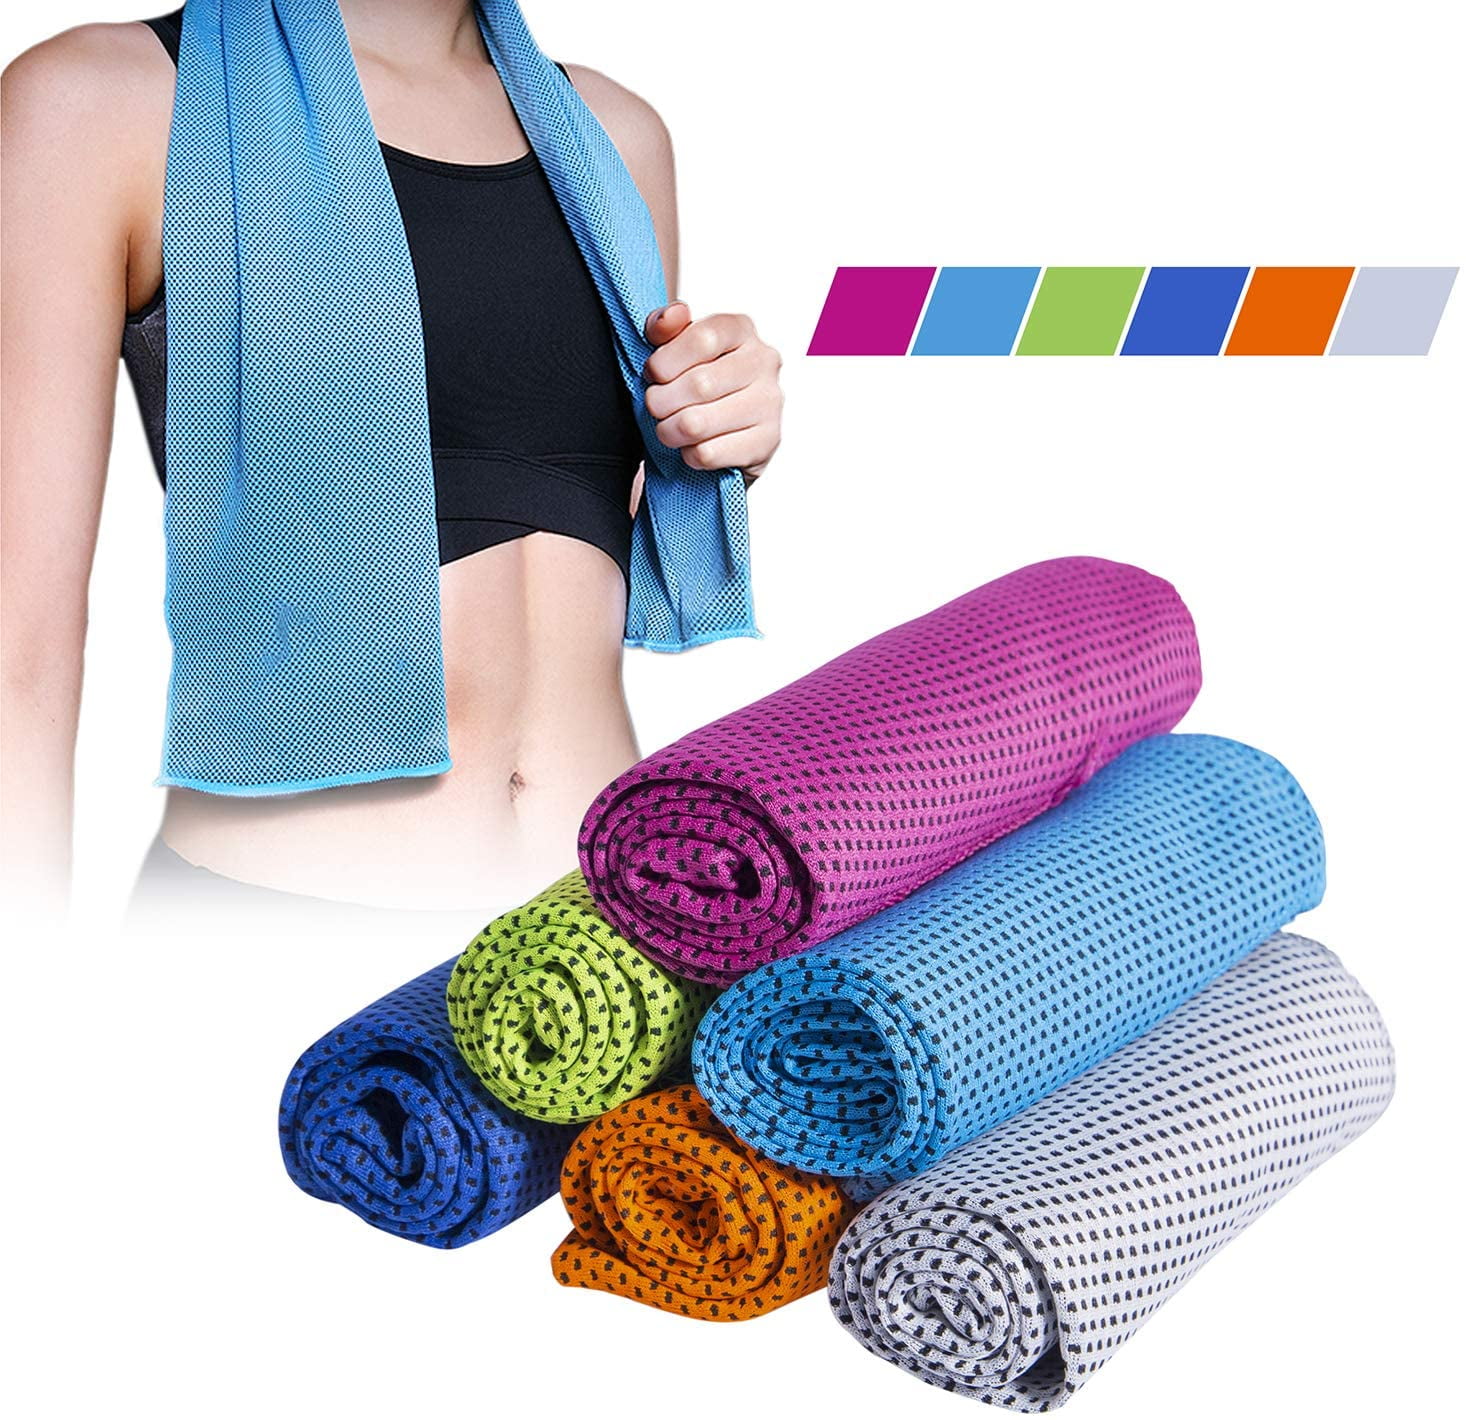 Details about   Premium Cooling Towel for Sports Workout Fitness Gym Yoga Pilates Travel Camping 